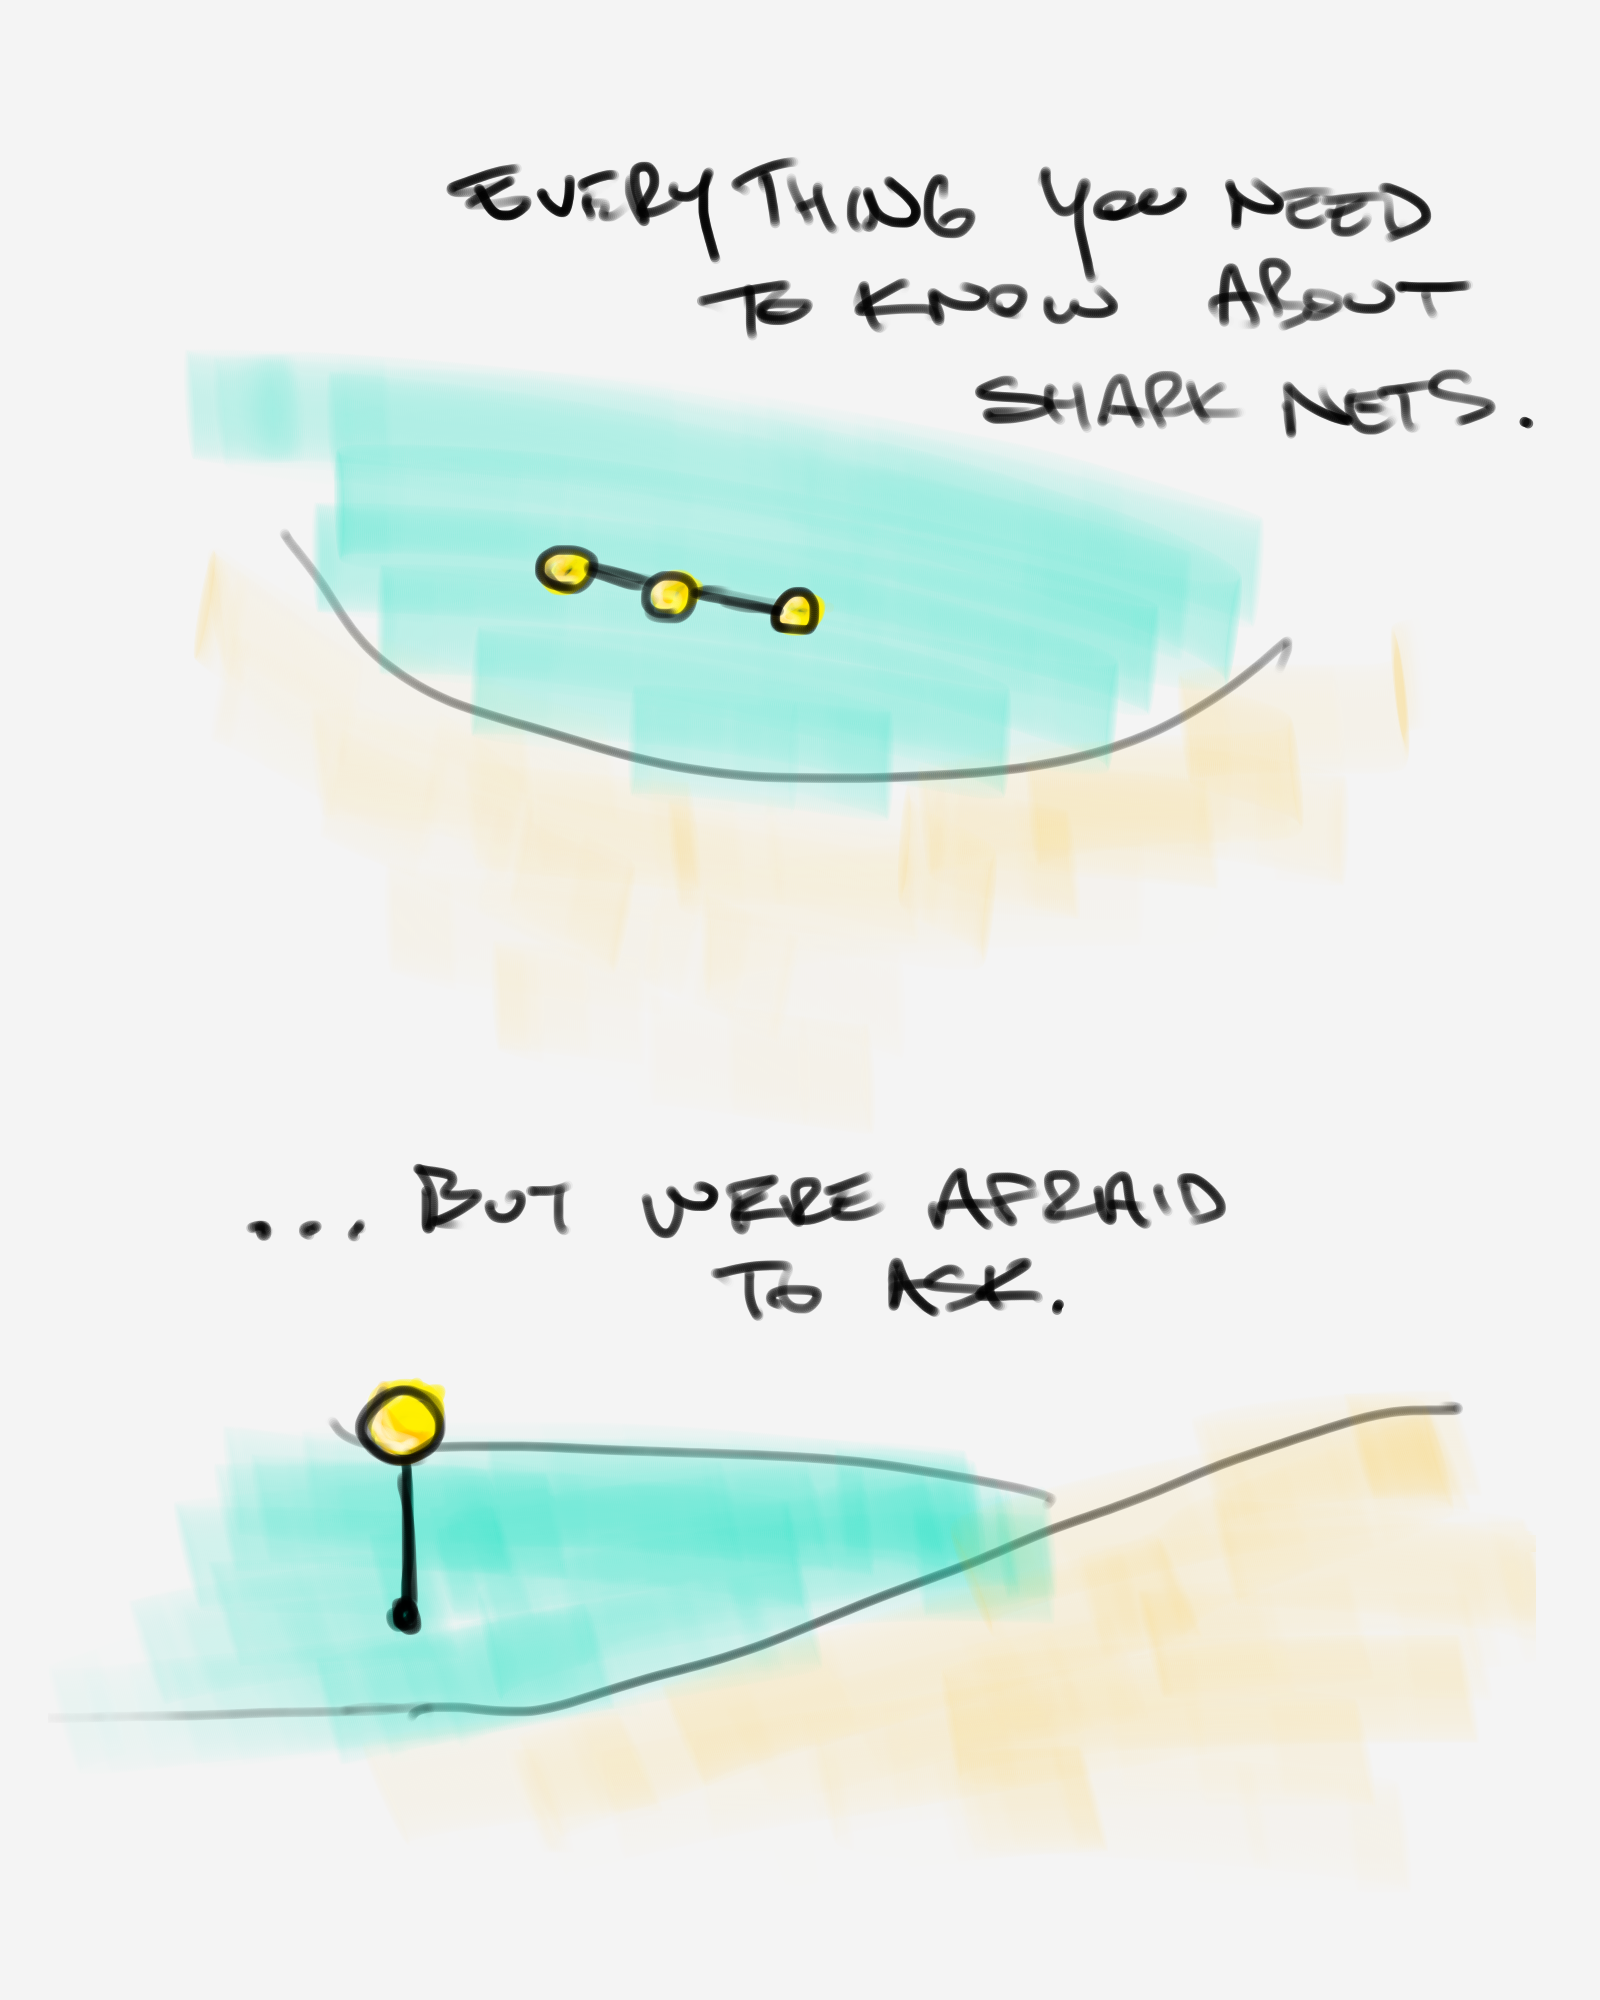 A drawing of how shark nets work. The sketch shows a beach and buoys linked together with nets—untehtered from either the coastine or the sea floor.